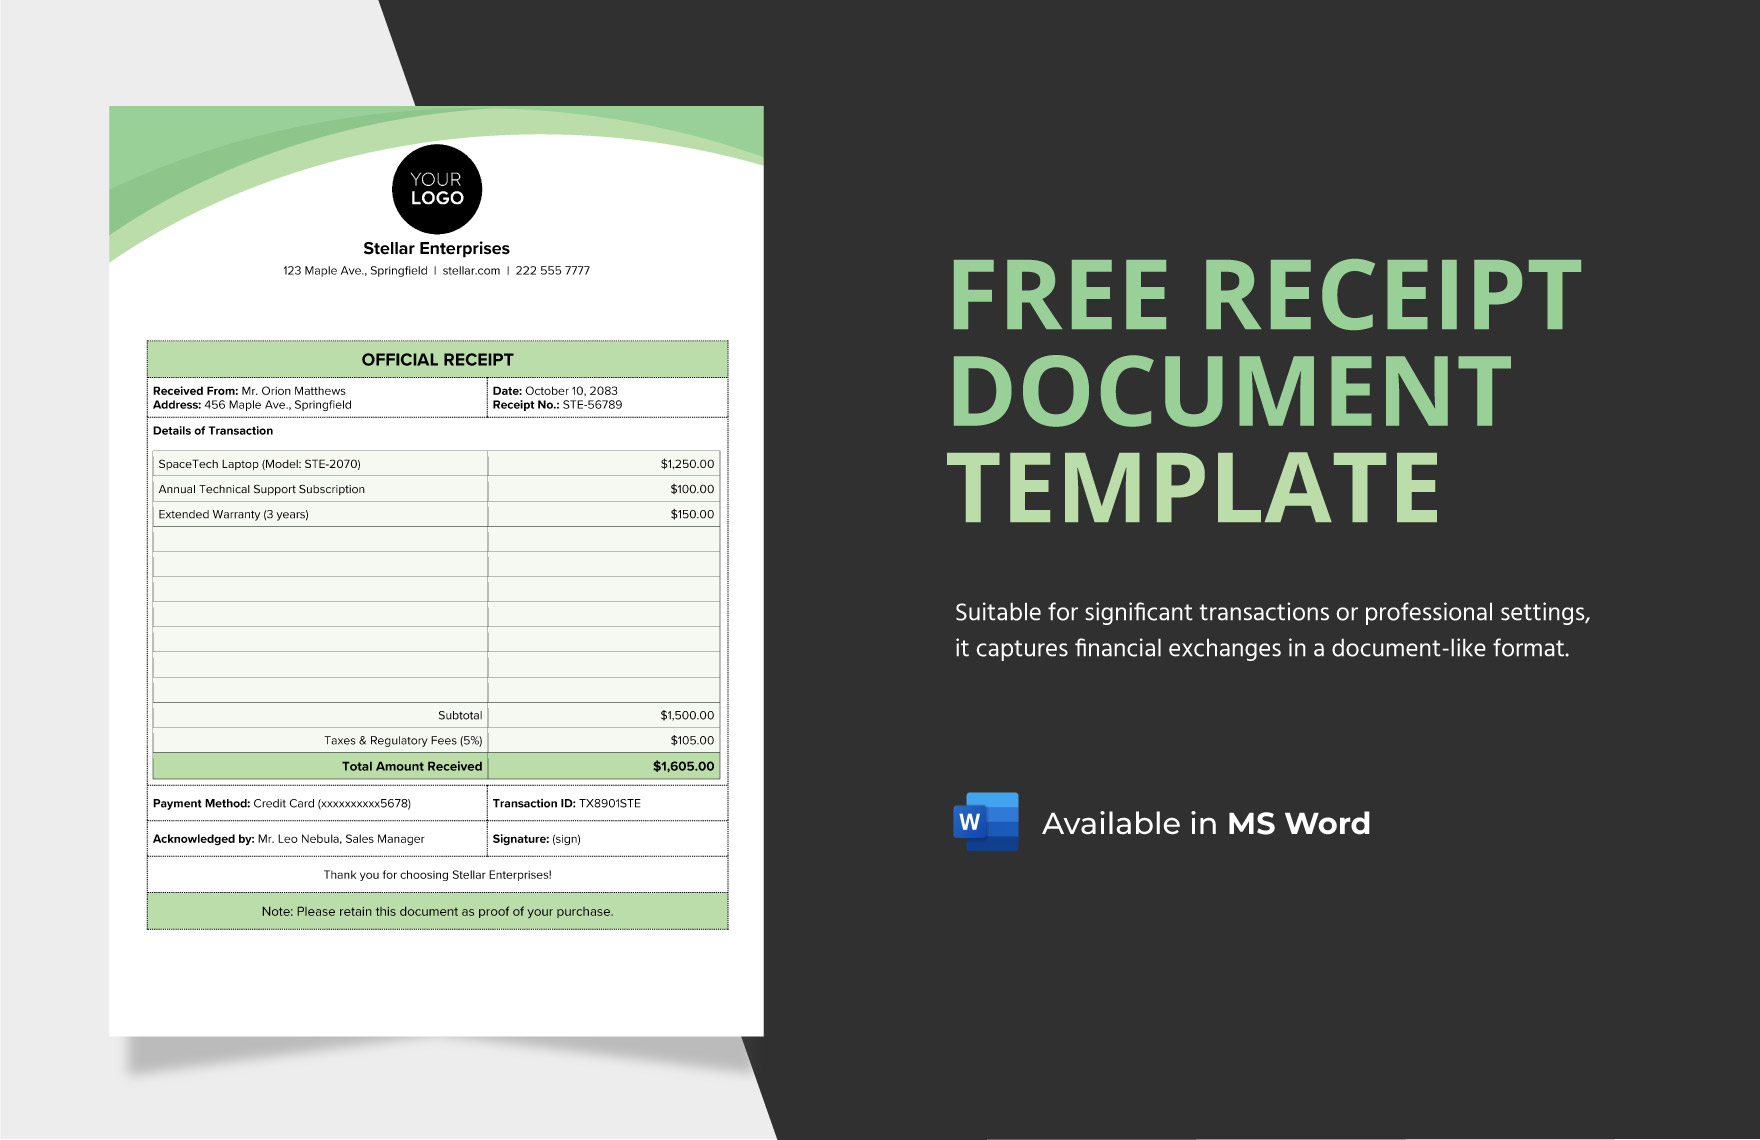 Free Receipt Document Template - Download in Word | Template.net